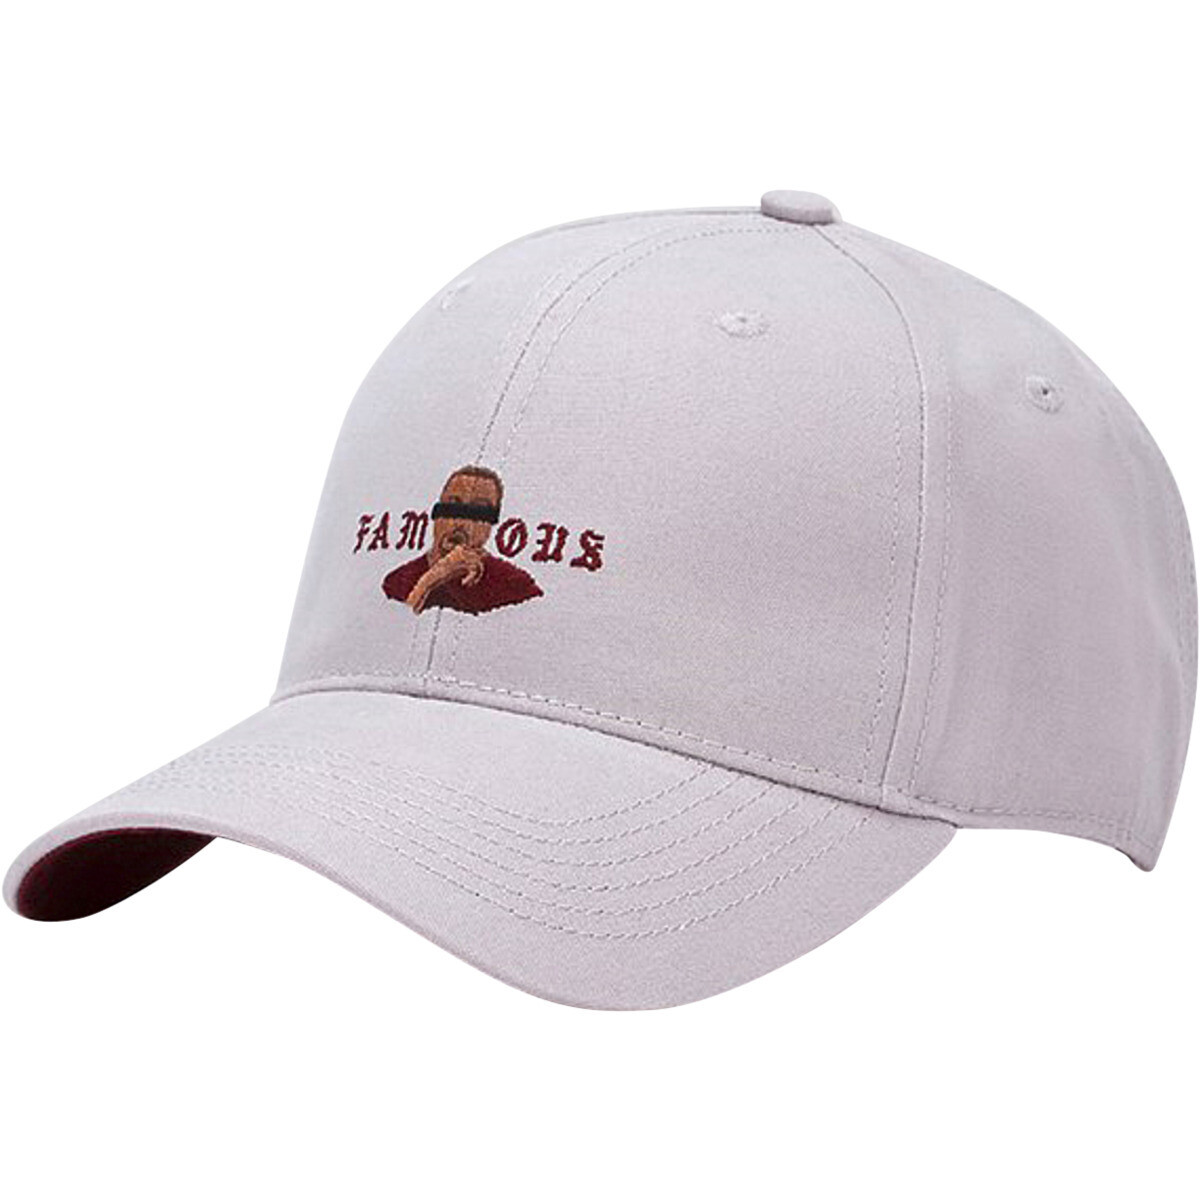 C&S WL Drop Out Curved Cap